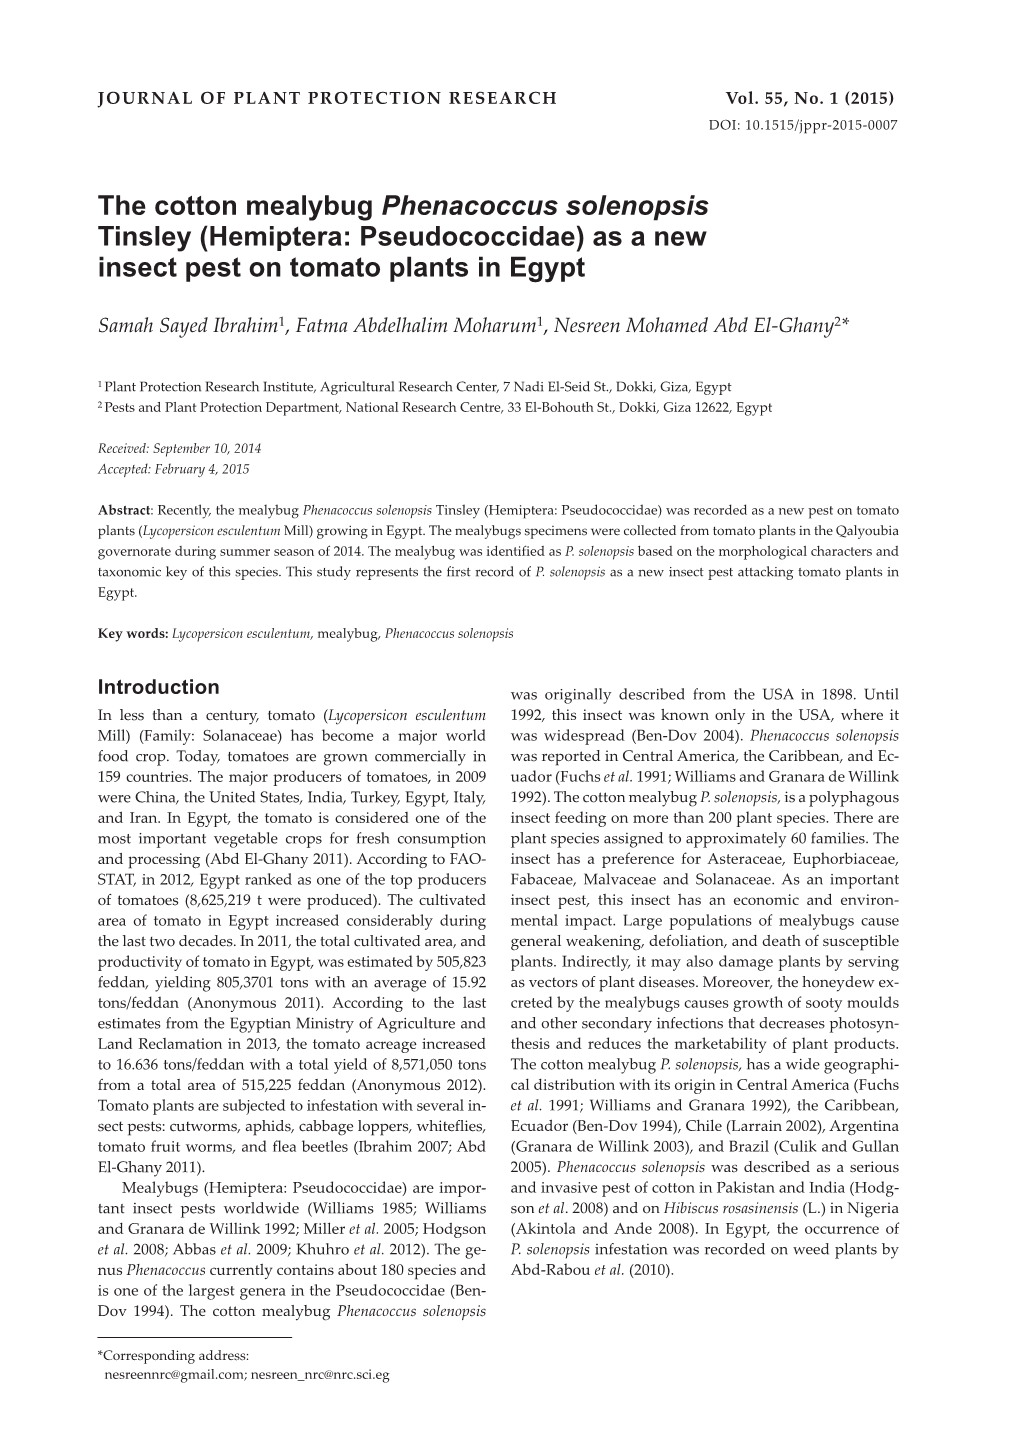 The Cotton Mealybug Phenacoccus Solenopsis Tinsley (Hemiptera: Pseudococcidae) As a New Insect Pest on Tomato Plants in Egypt